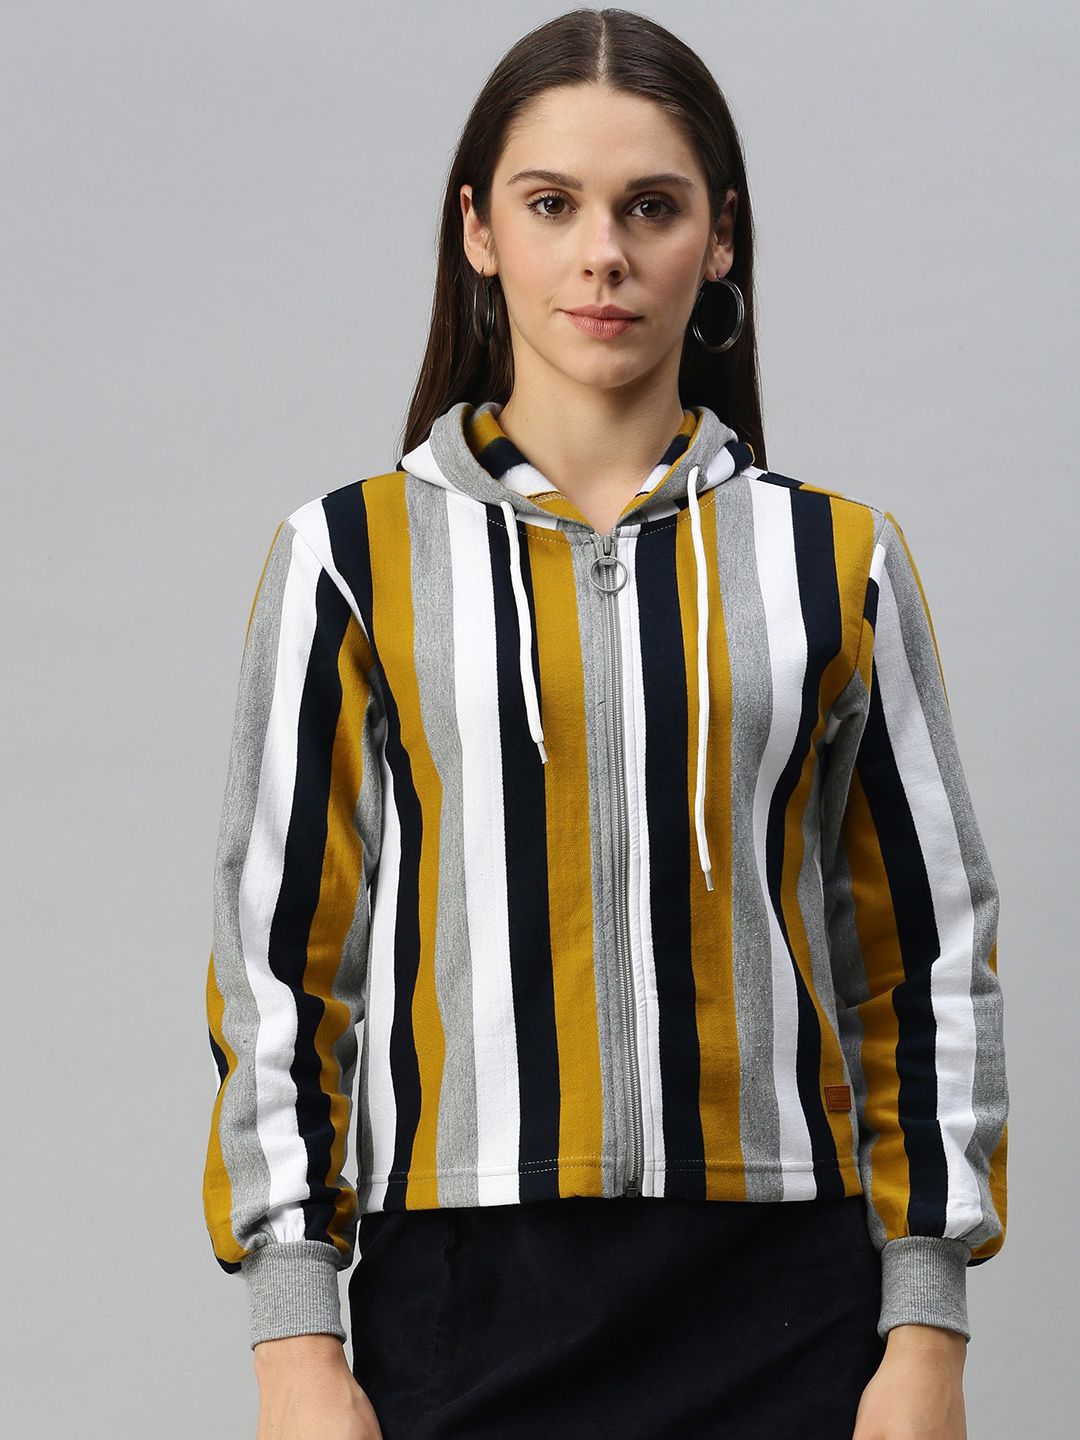 Campus Sutra Women Multicoloured Striped Hooded Front-Open Sweatshirt Price in India